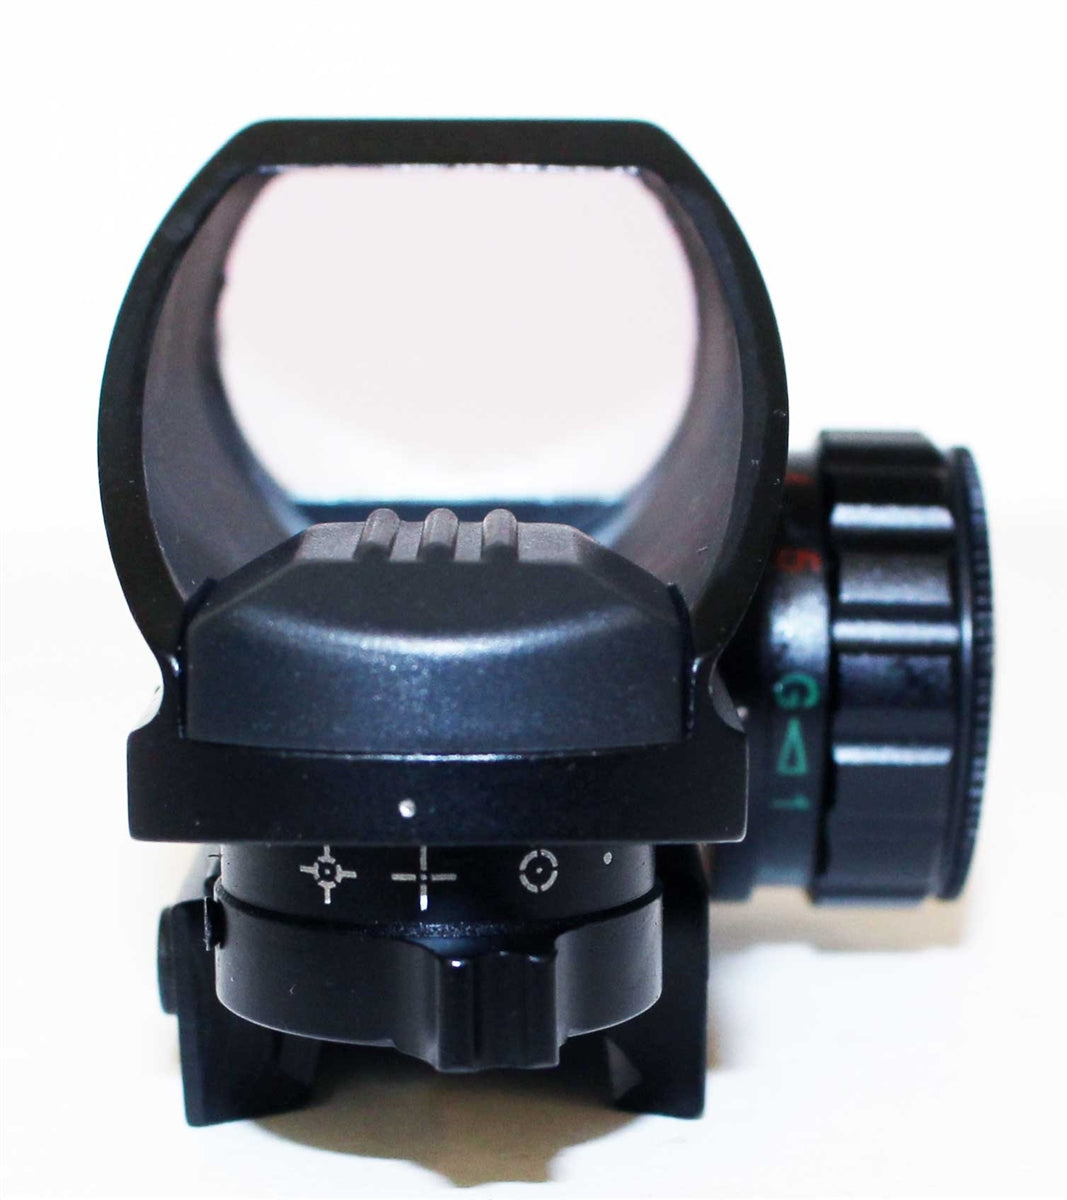 Trinity Reflex Sight Red Green Reticles With Saddle Mount Picatinny Rail Adapter Compatible With Mossberg 500 12 Gauge.